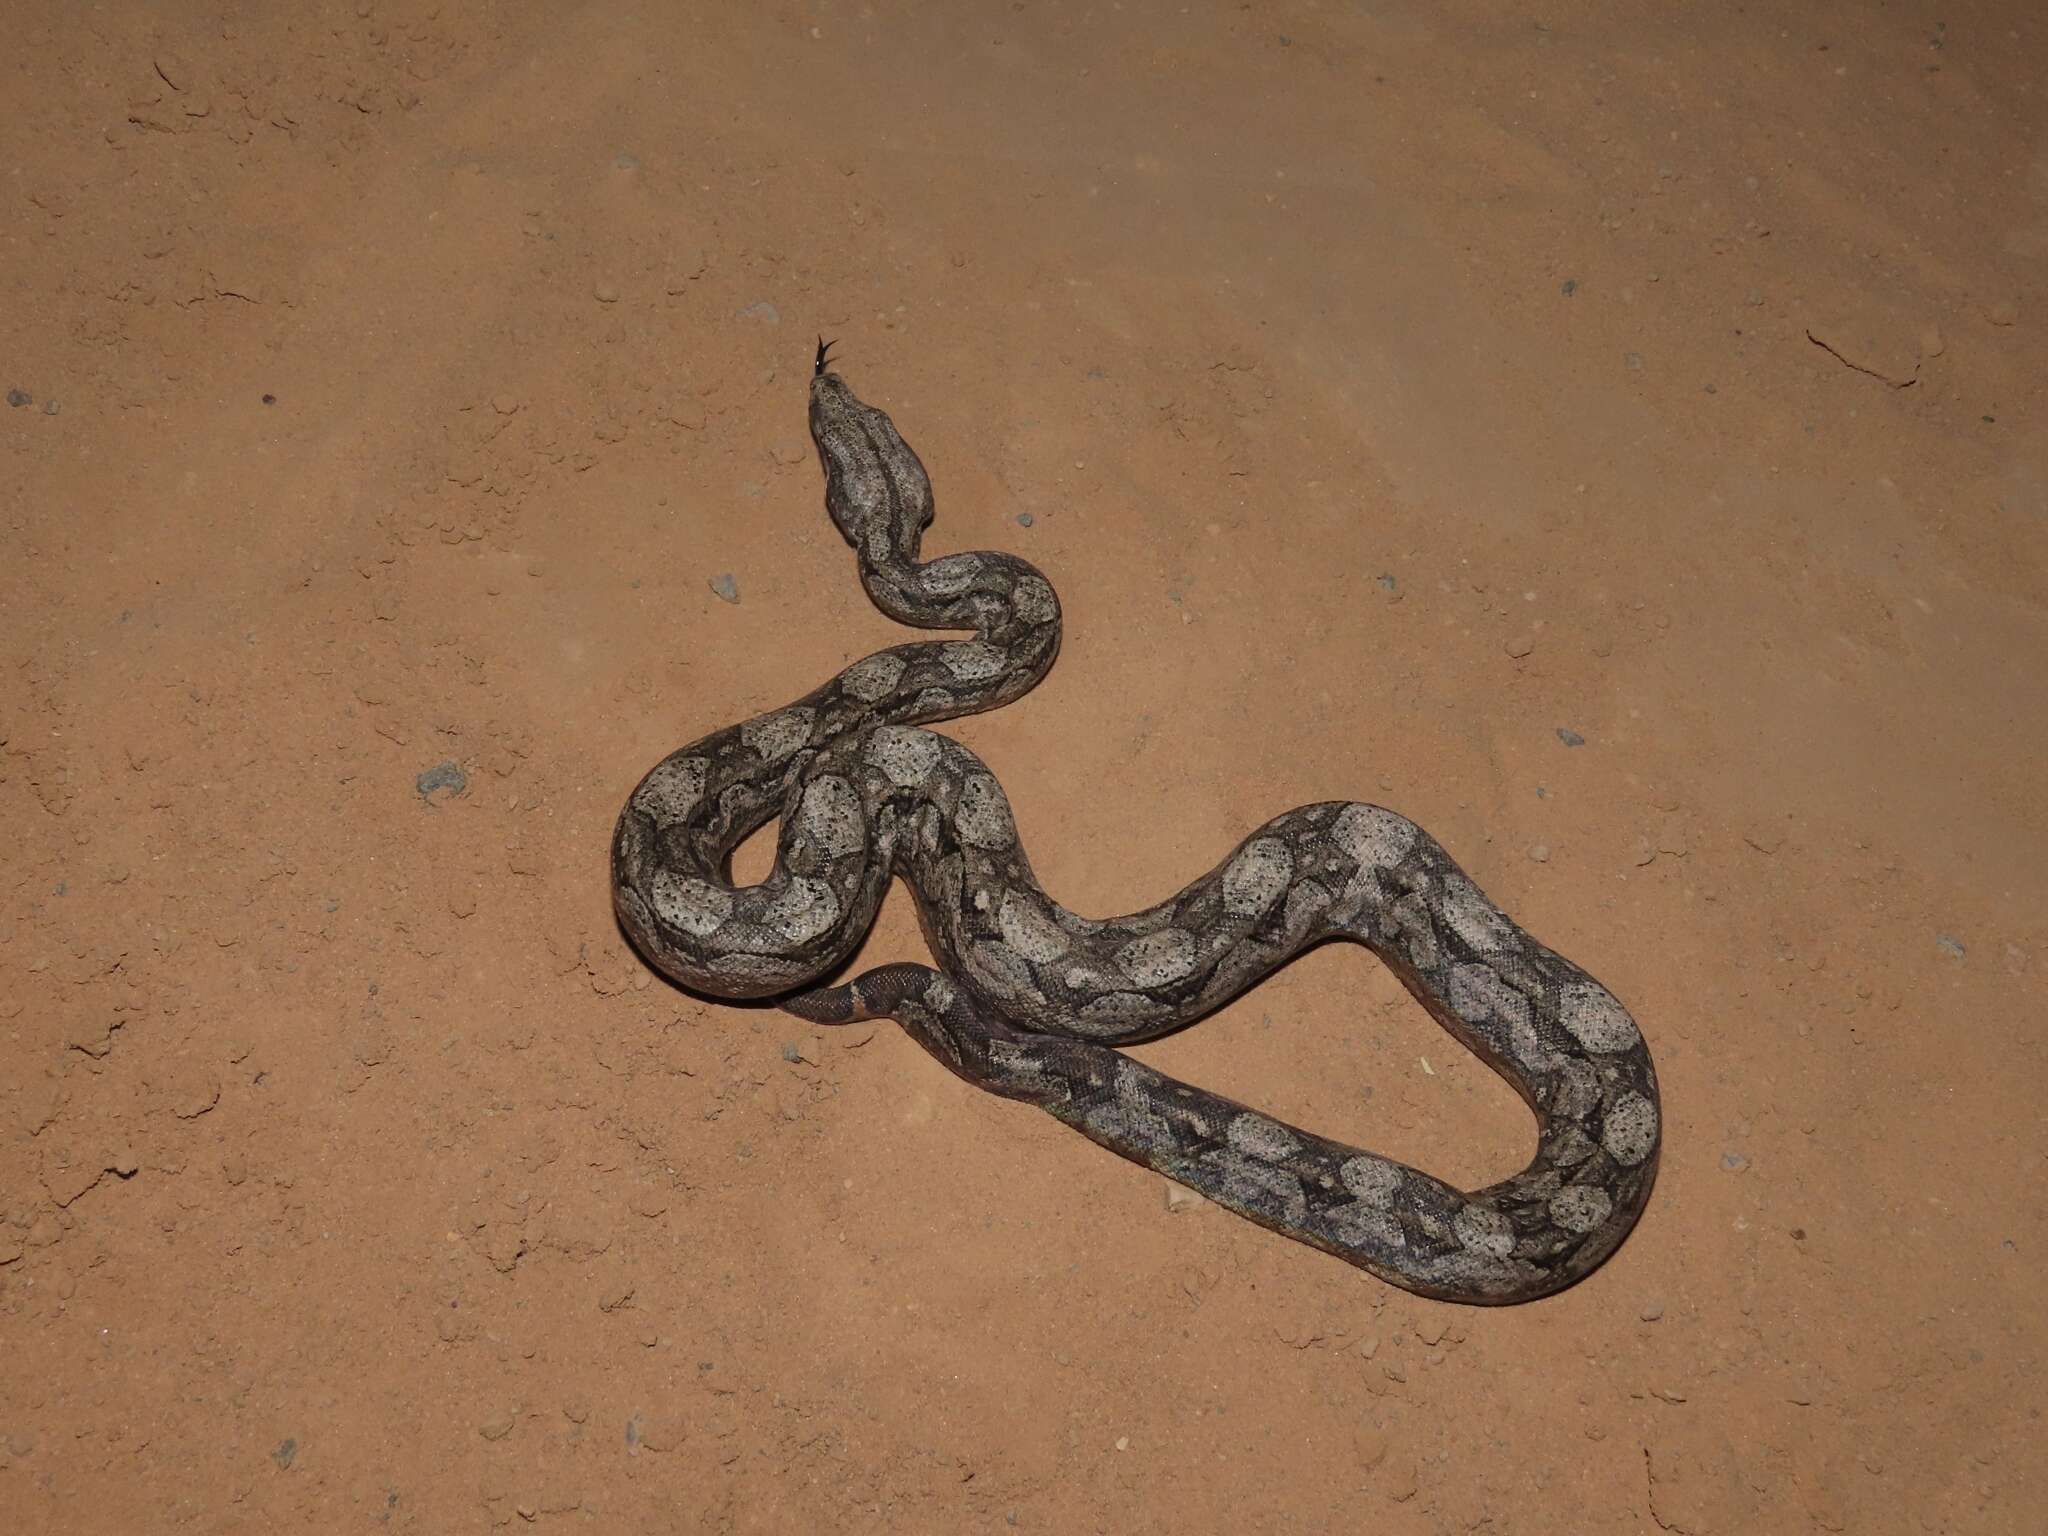 Image of Argentine Boa Constrictor